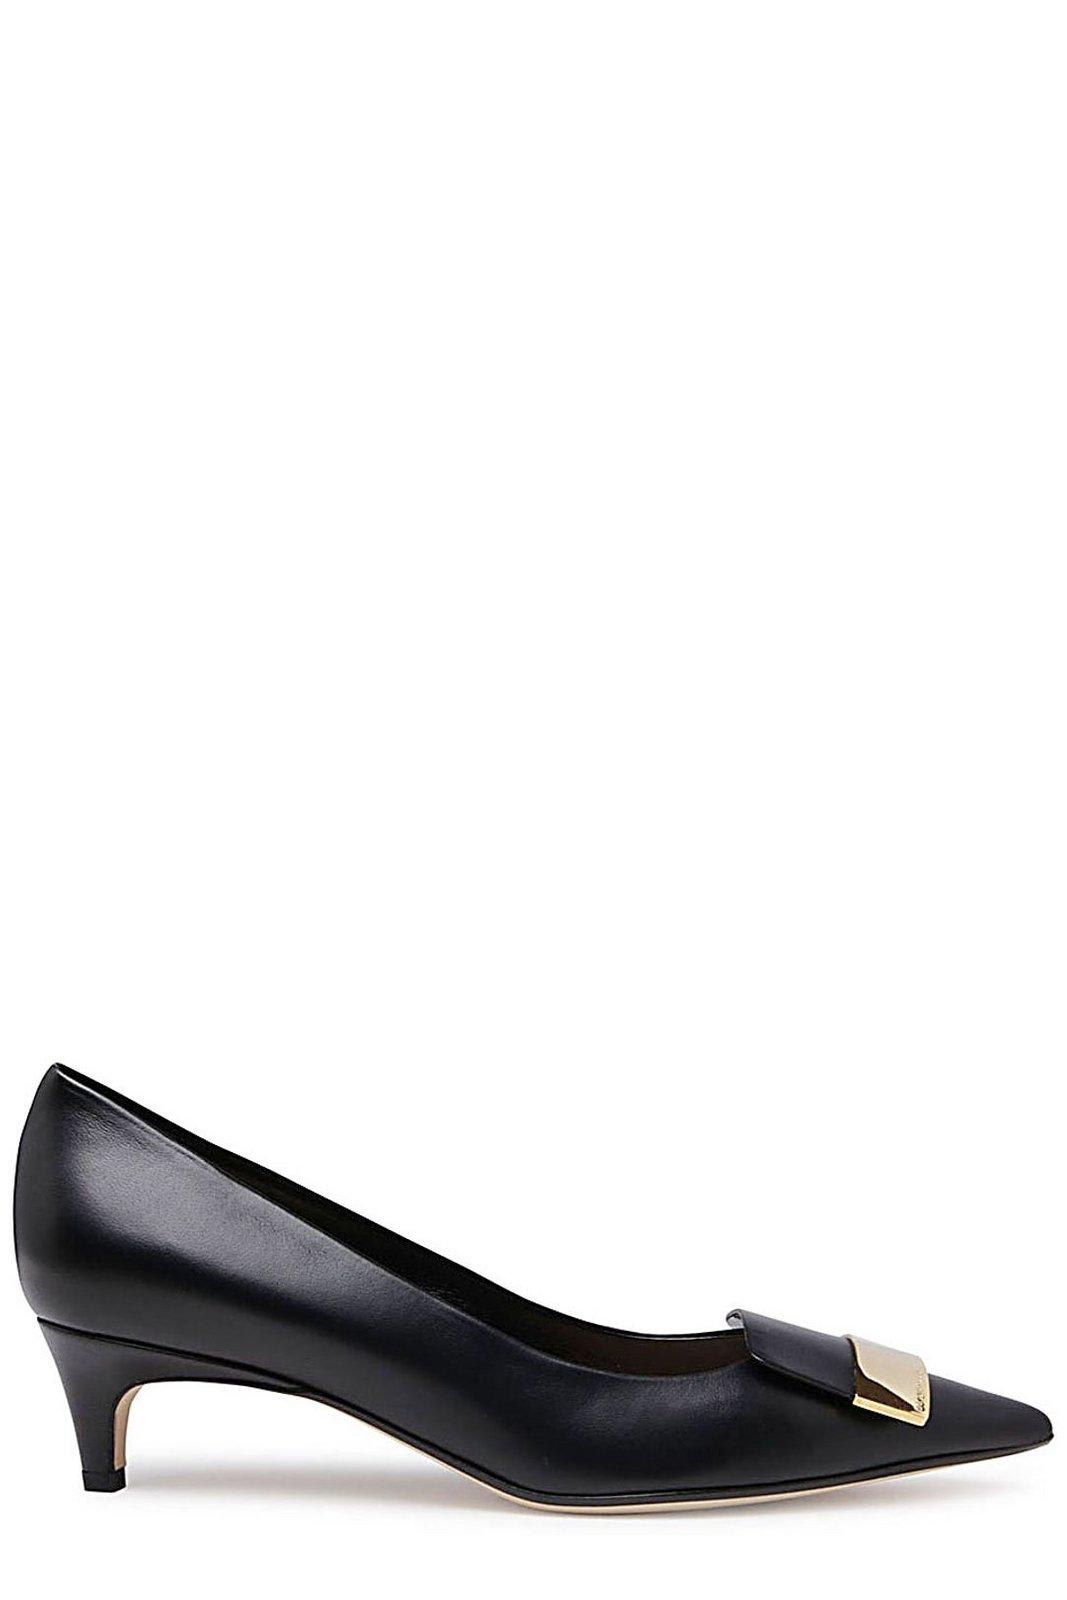 Sr1 Pointed Toe Pumps